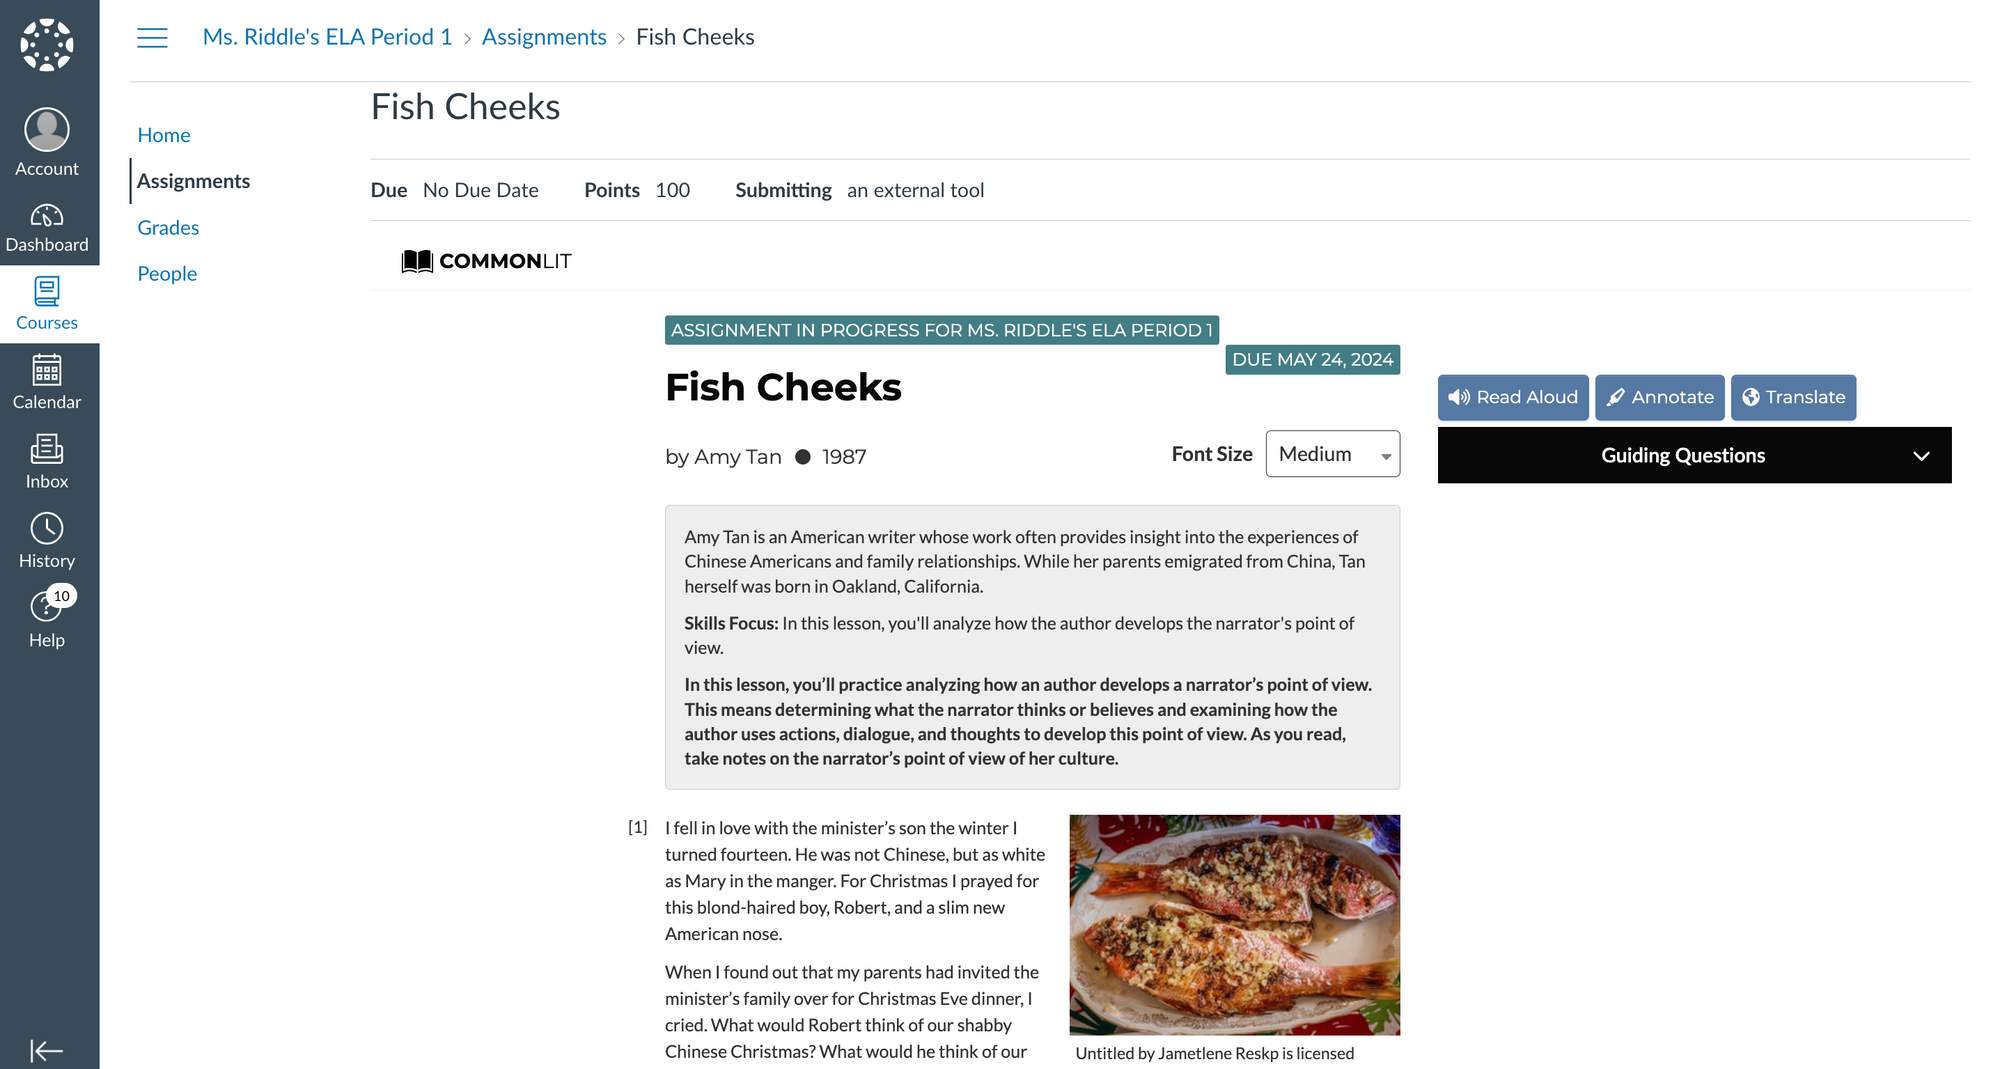 The CommonLit lesson "Fish Cheeks" assigned in Canvas.